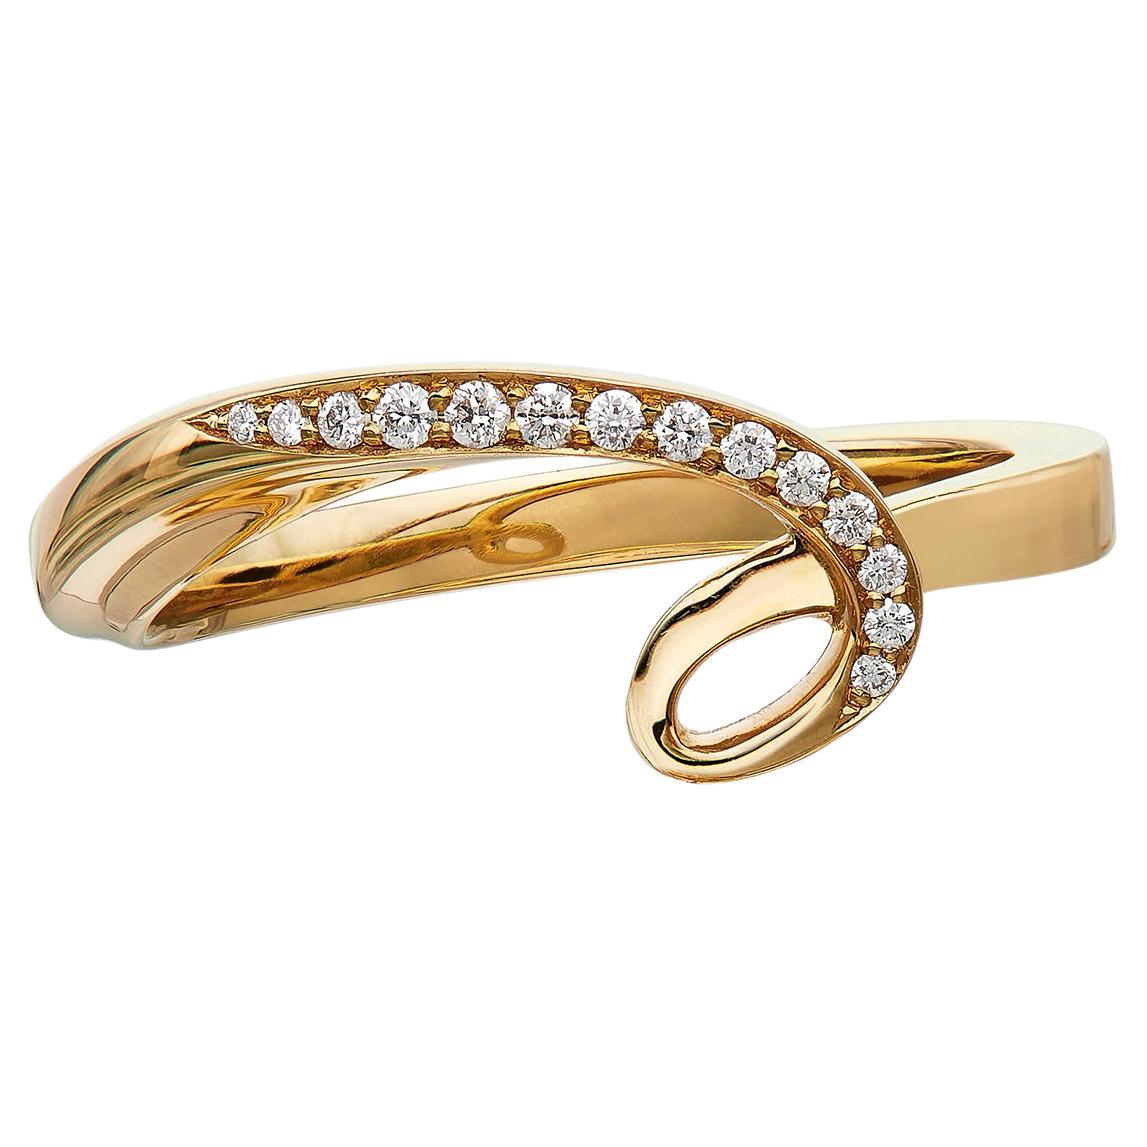 For Sale:  Handcrafted Loop Ring, 18k Gold and Pave Set with Brilliant Cut Diamonds